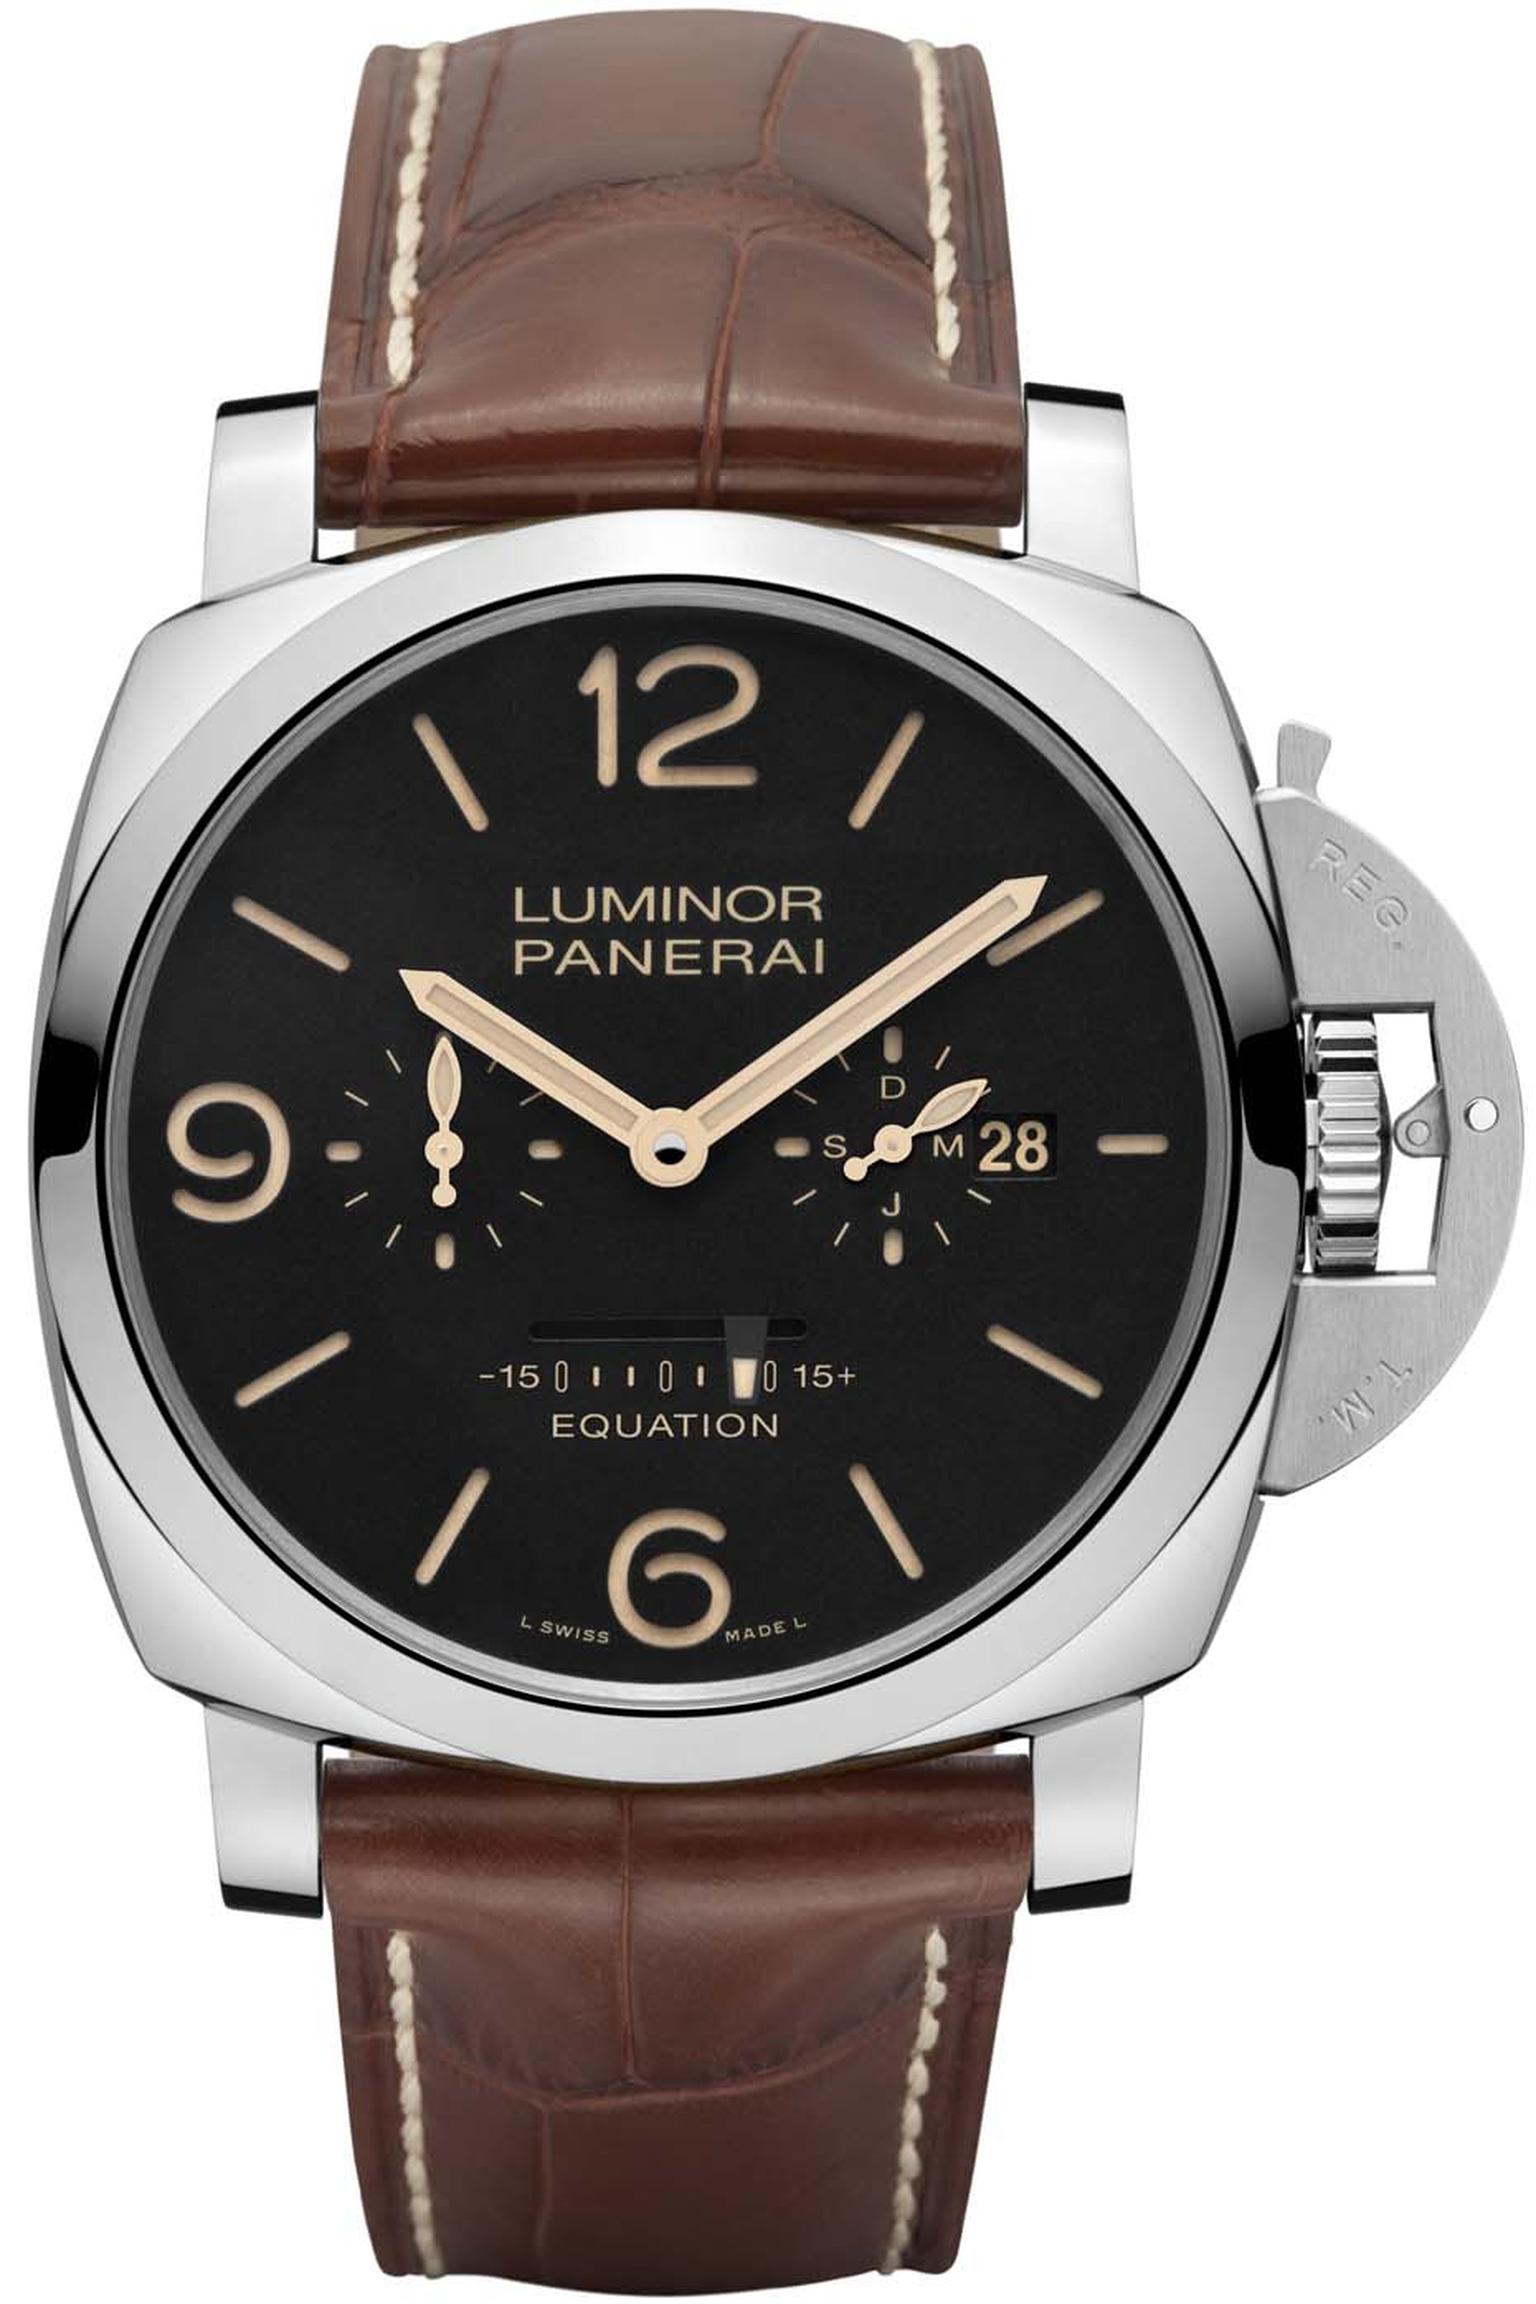 Panerai Luminor 1950 watch with equation of time indication was unveiled at the SIHH watch salon this year. An equation of time complication indicates the difference between solar time and conventional mean time. Panerai has opted for a linear indicator o